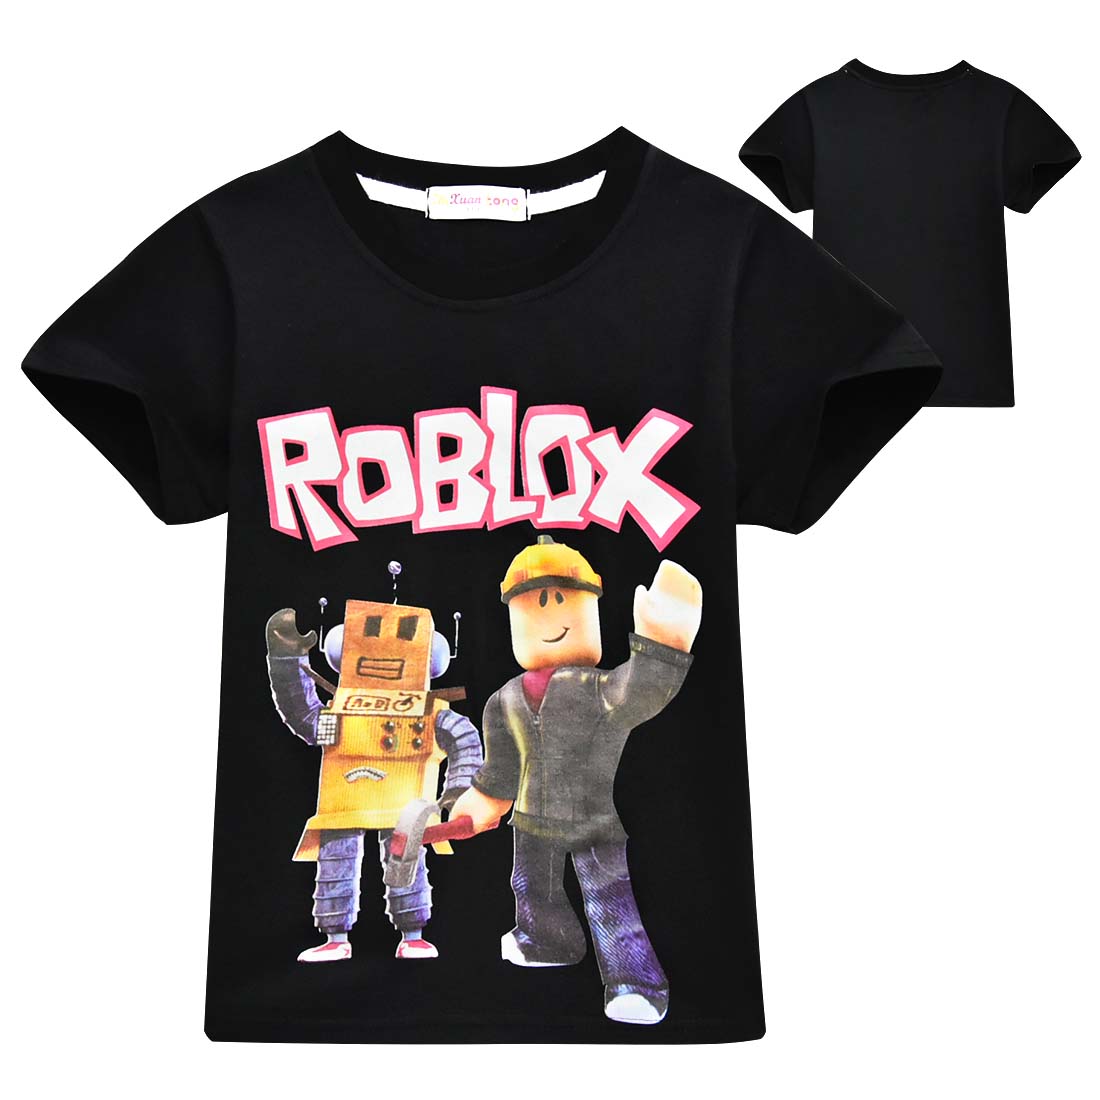 Roblox 2 Kid S Unisex T Shirt Size 6 12 Herse Clothing - roblox stardust ethical kids t shirt size 2 10